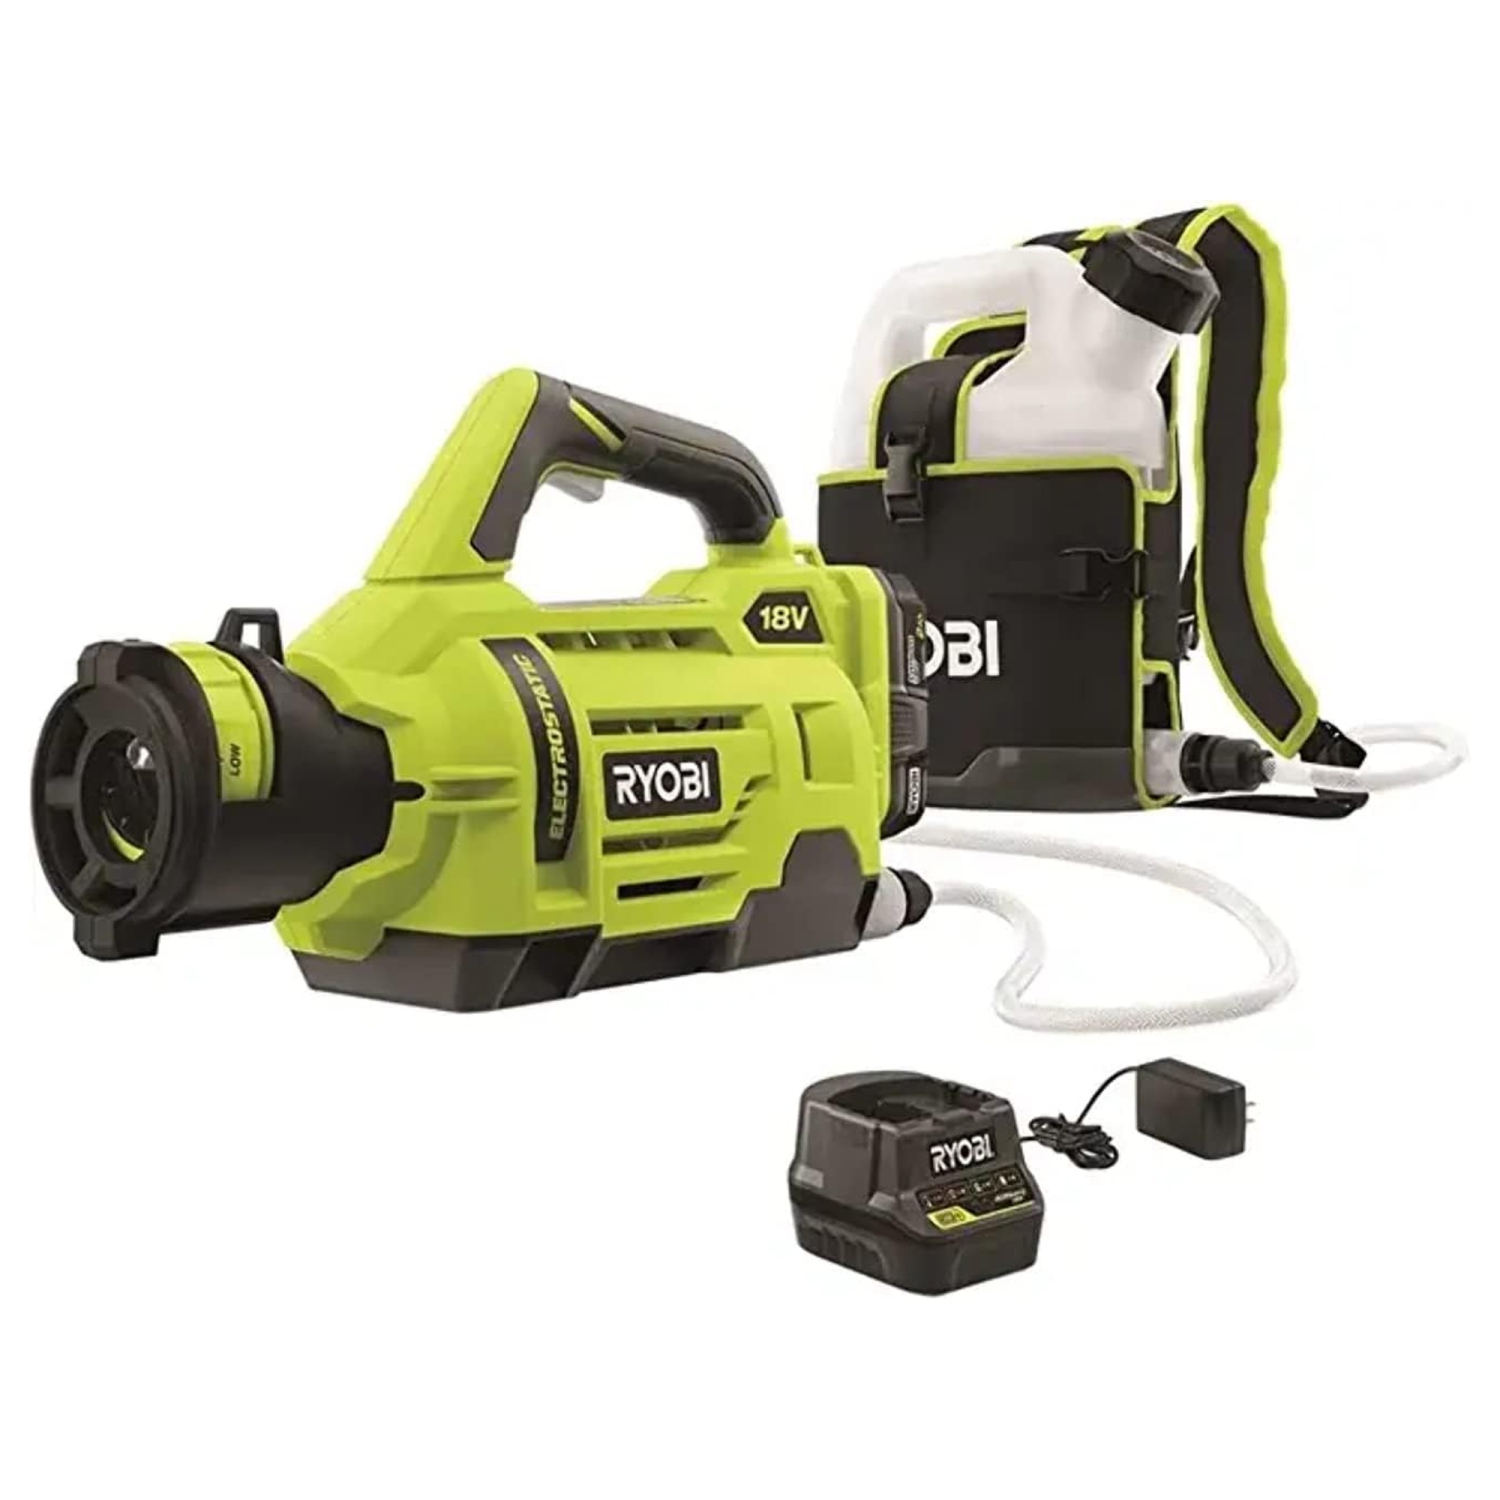 RYOBI ONE+ 18-Volt Lithium-Ion Cordless Electrostatic Sprayer with 2 2.0 Ah Battery and Charger Included